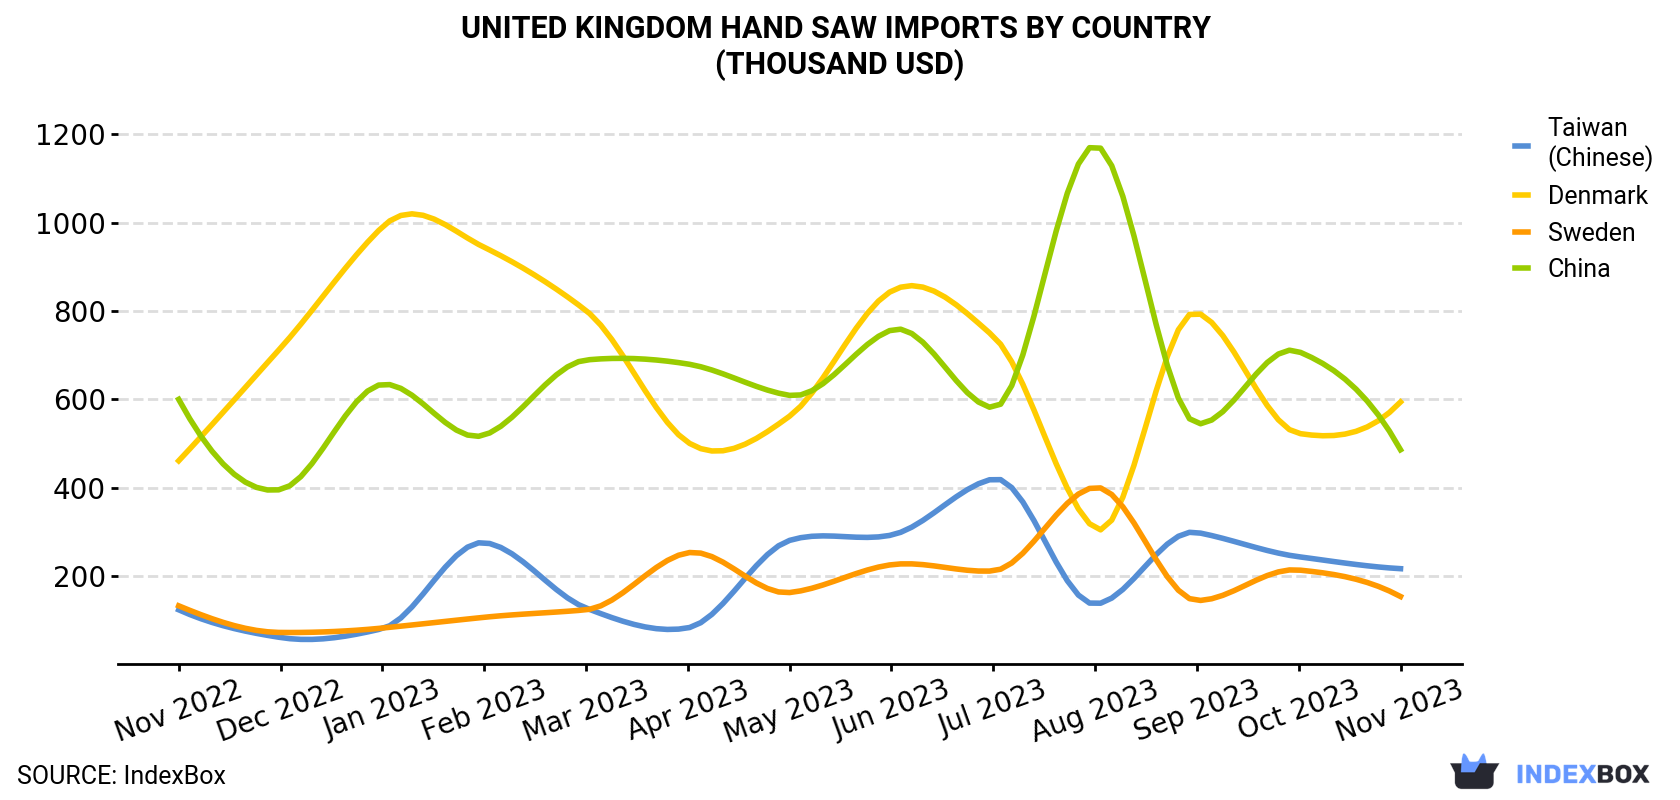 United Kingdom Hand Saw Imports By Country (Thousand USD)